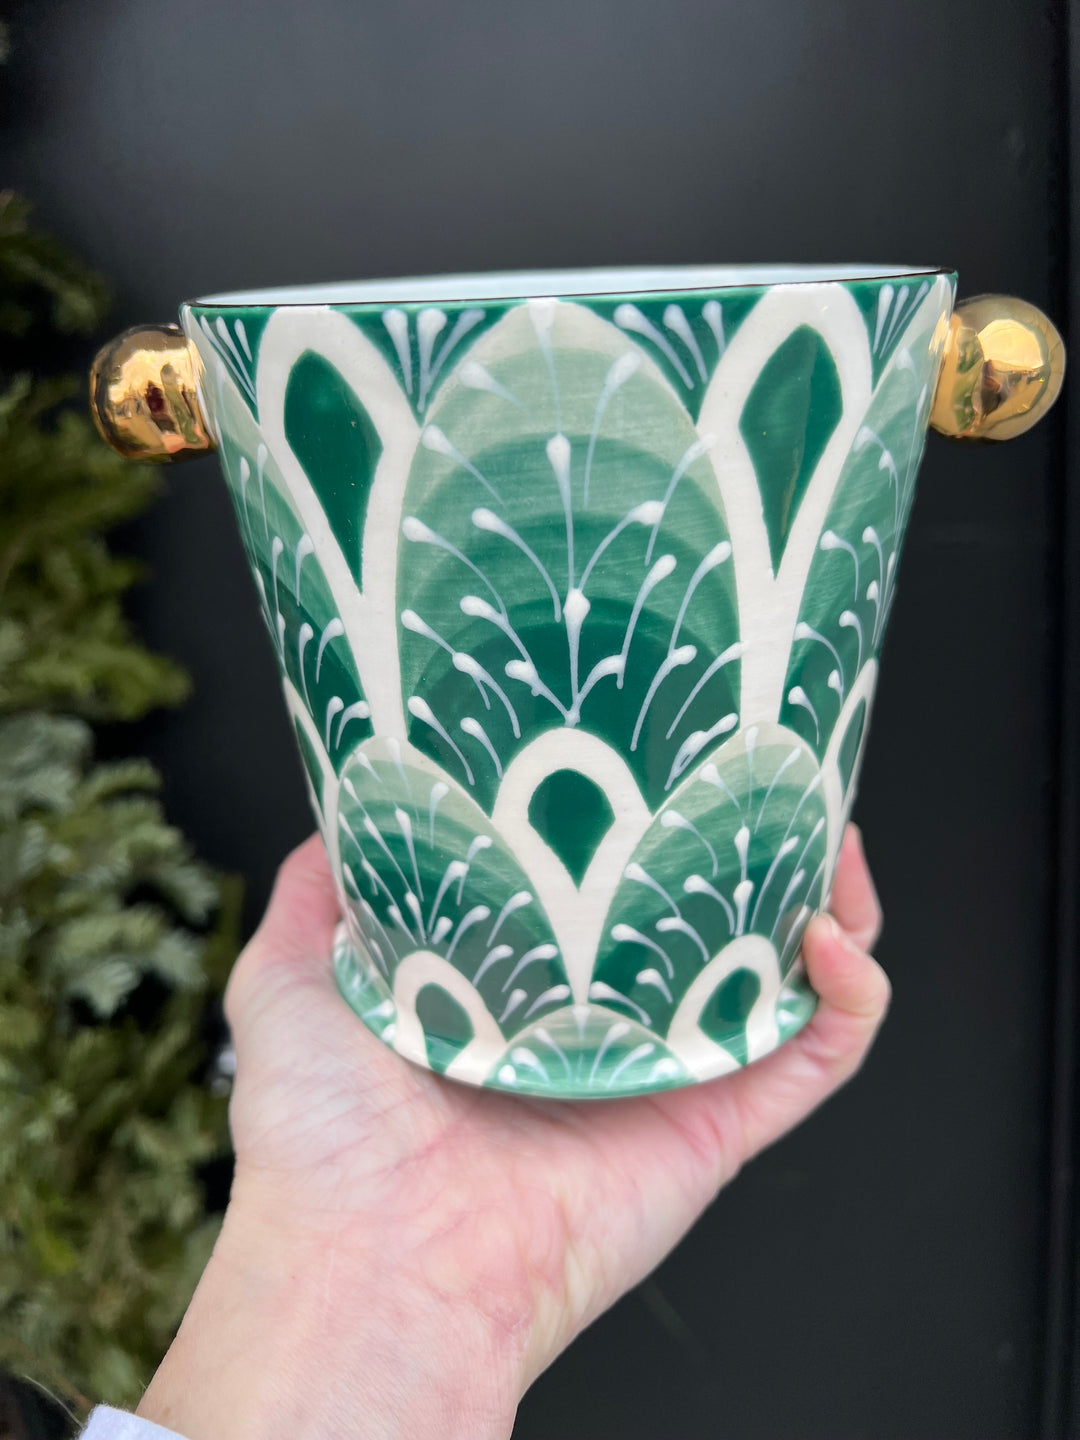 A small herb pot hand painted with a green feathery pattern and gold knobs and rim.